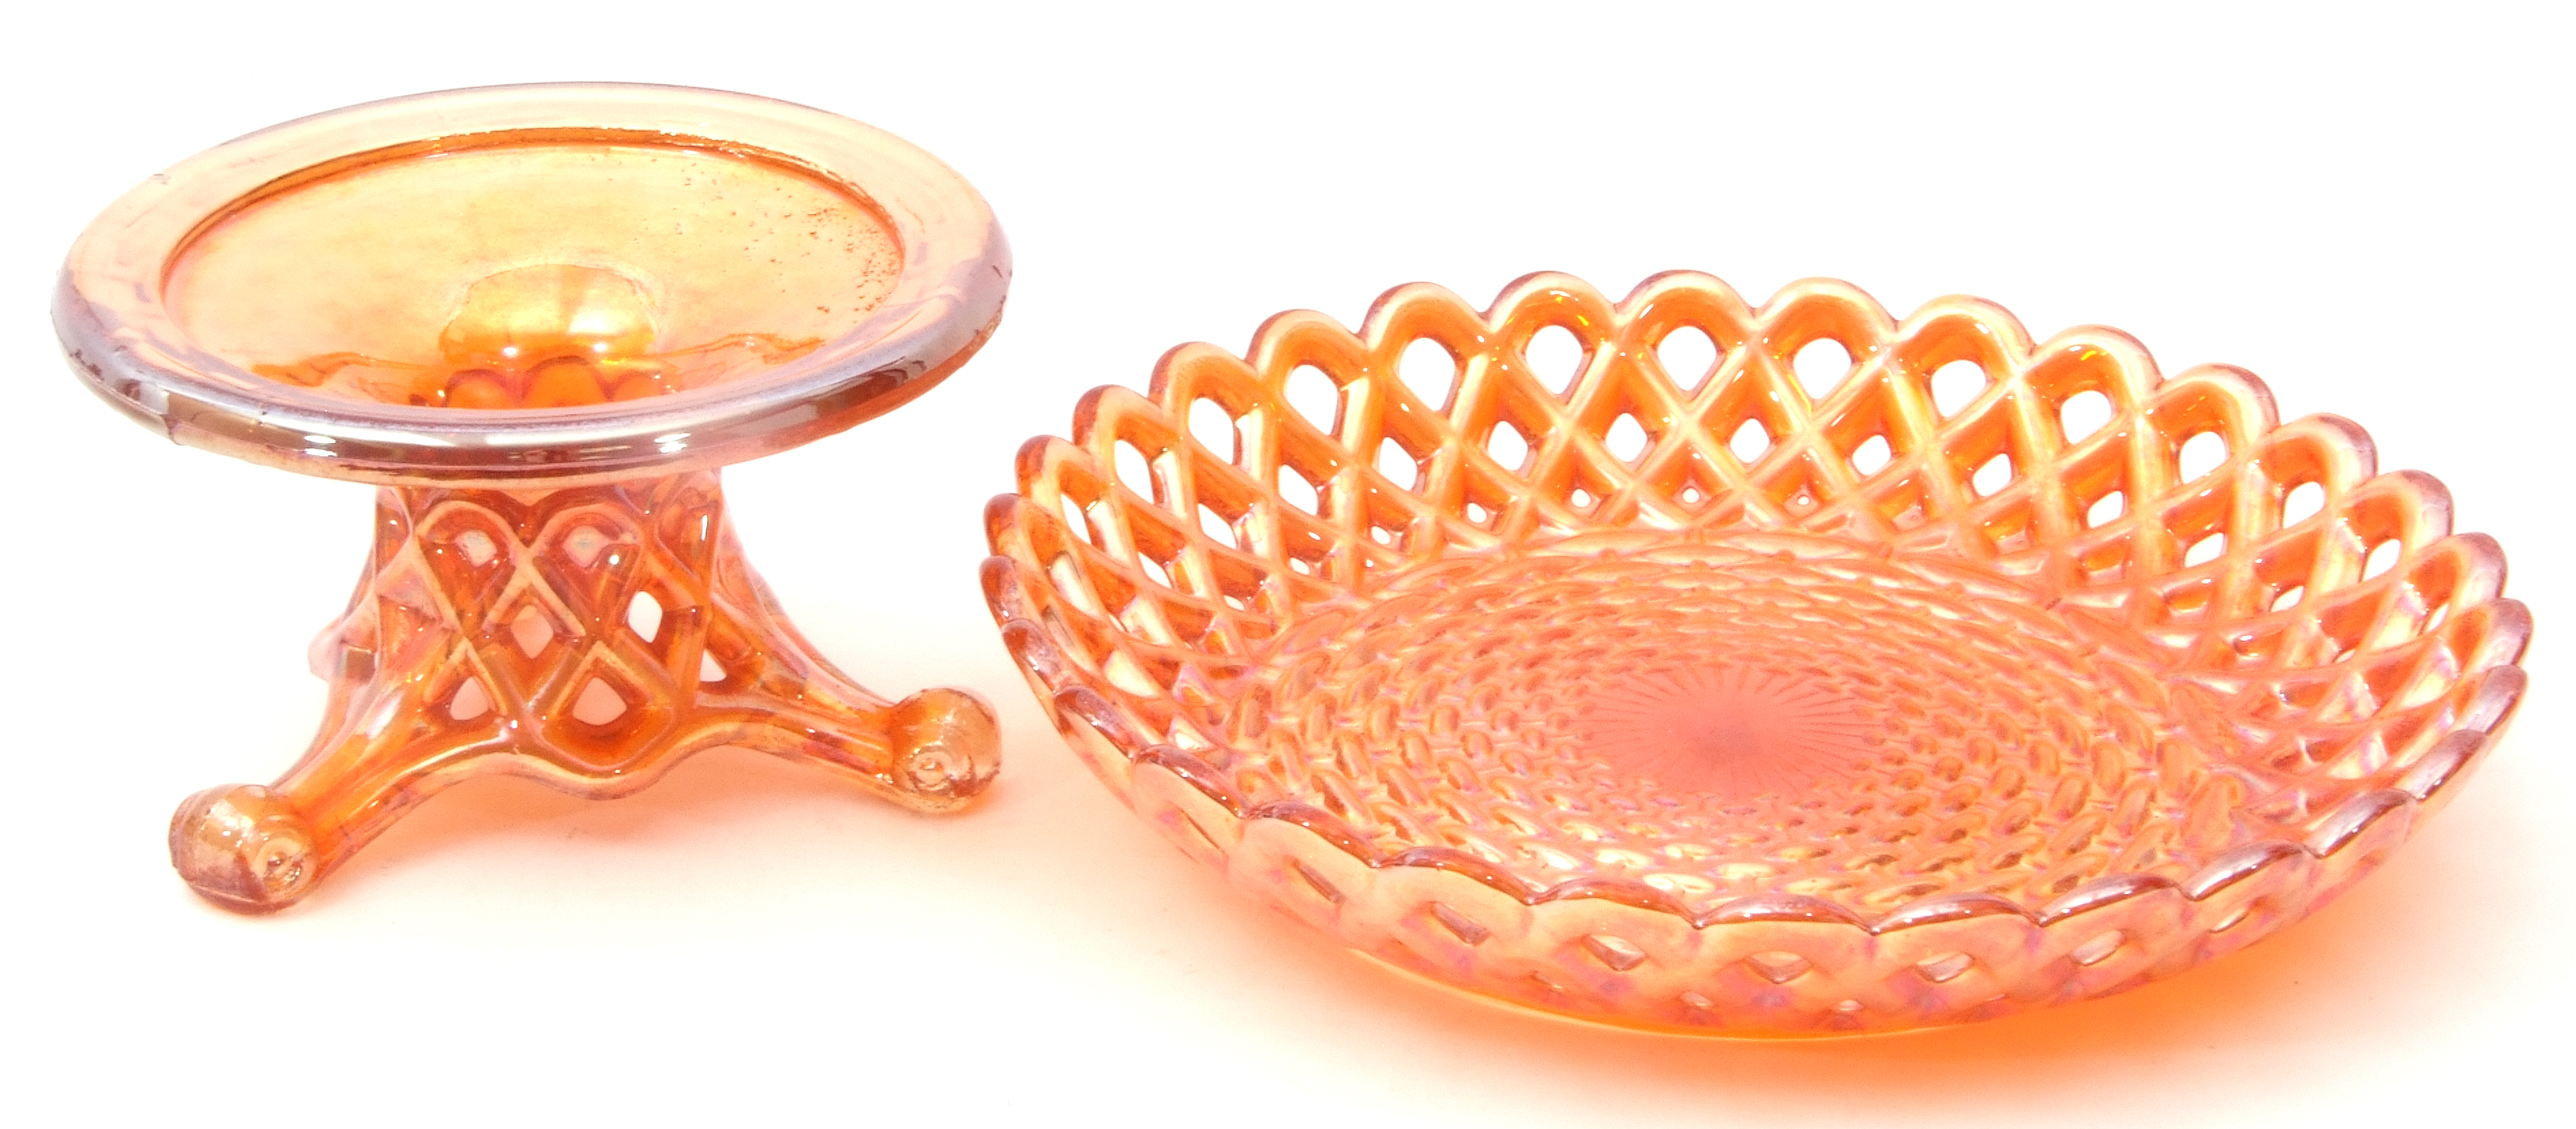 Brockwitz carnival glass lavender bowl with the four flowers variant pattern, a Fenton Autumn acorns - Image 4 of 8